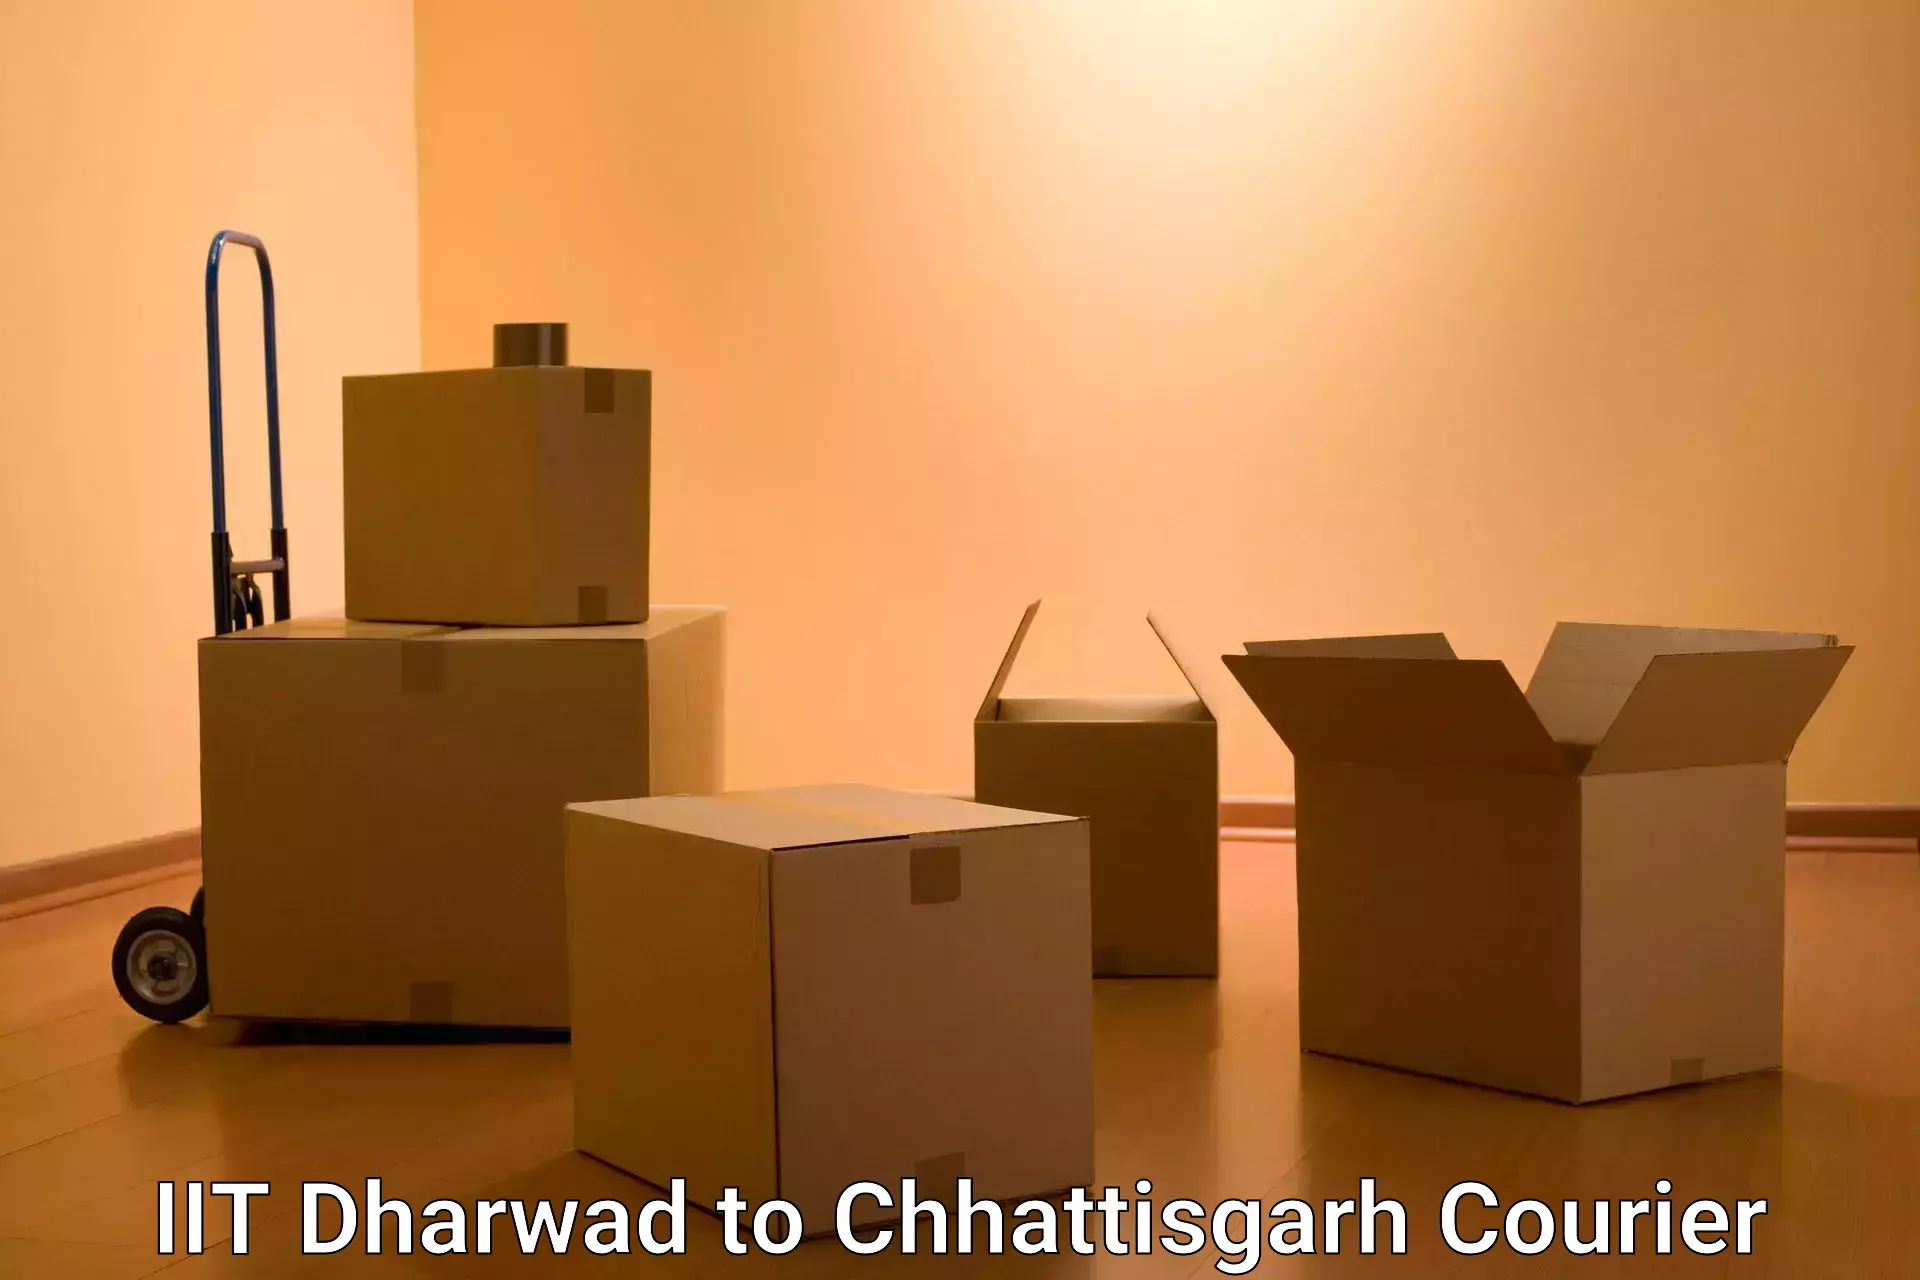 Package delivery network IIT Dharwad to Mahasamund